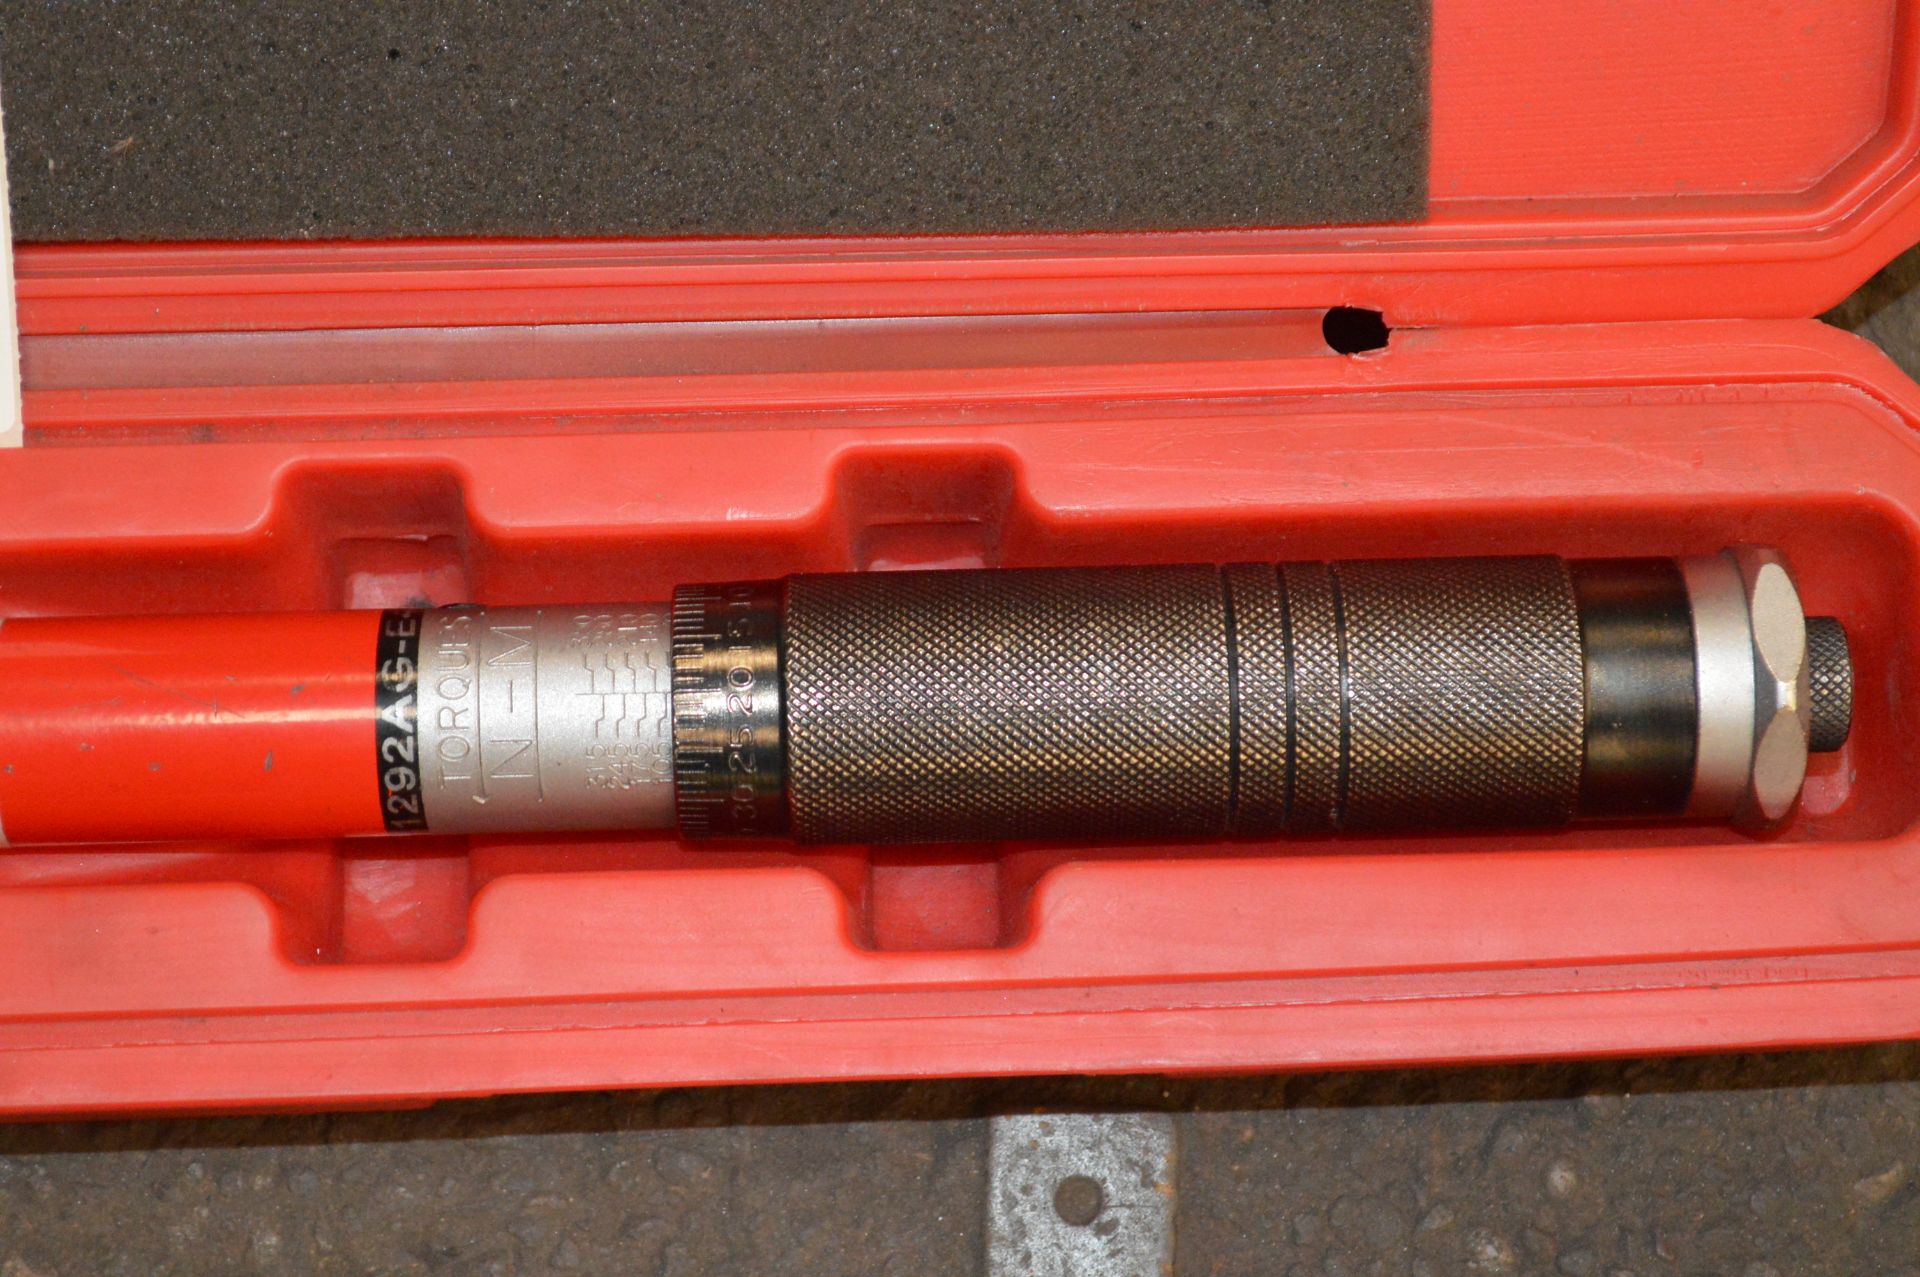 Tengtool Torque Wrench Model No: 1292AG E4 with Case - Image 4 of 7